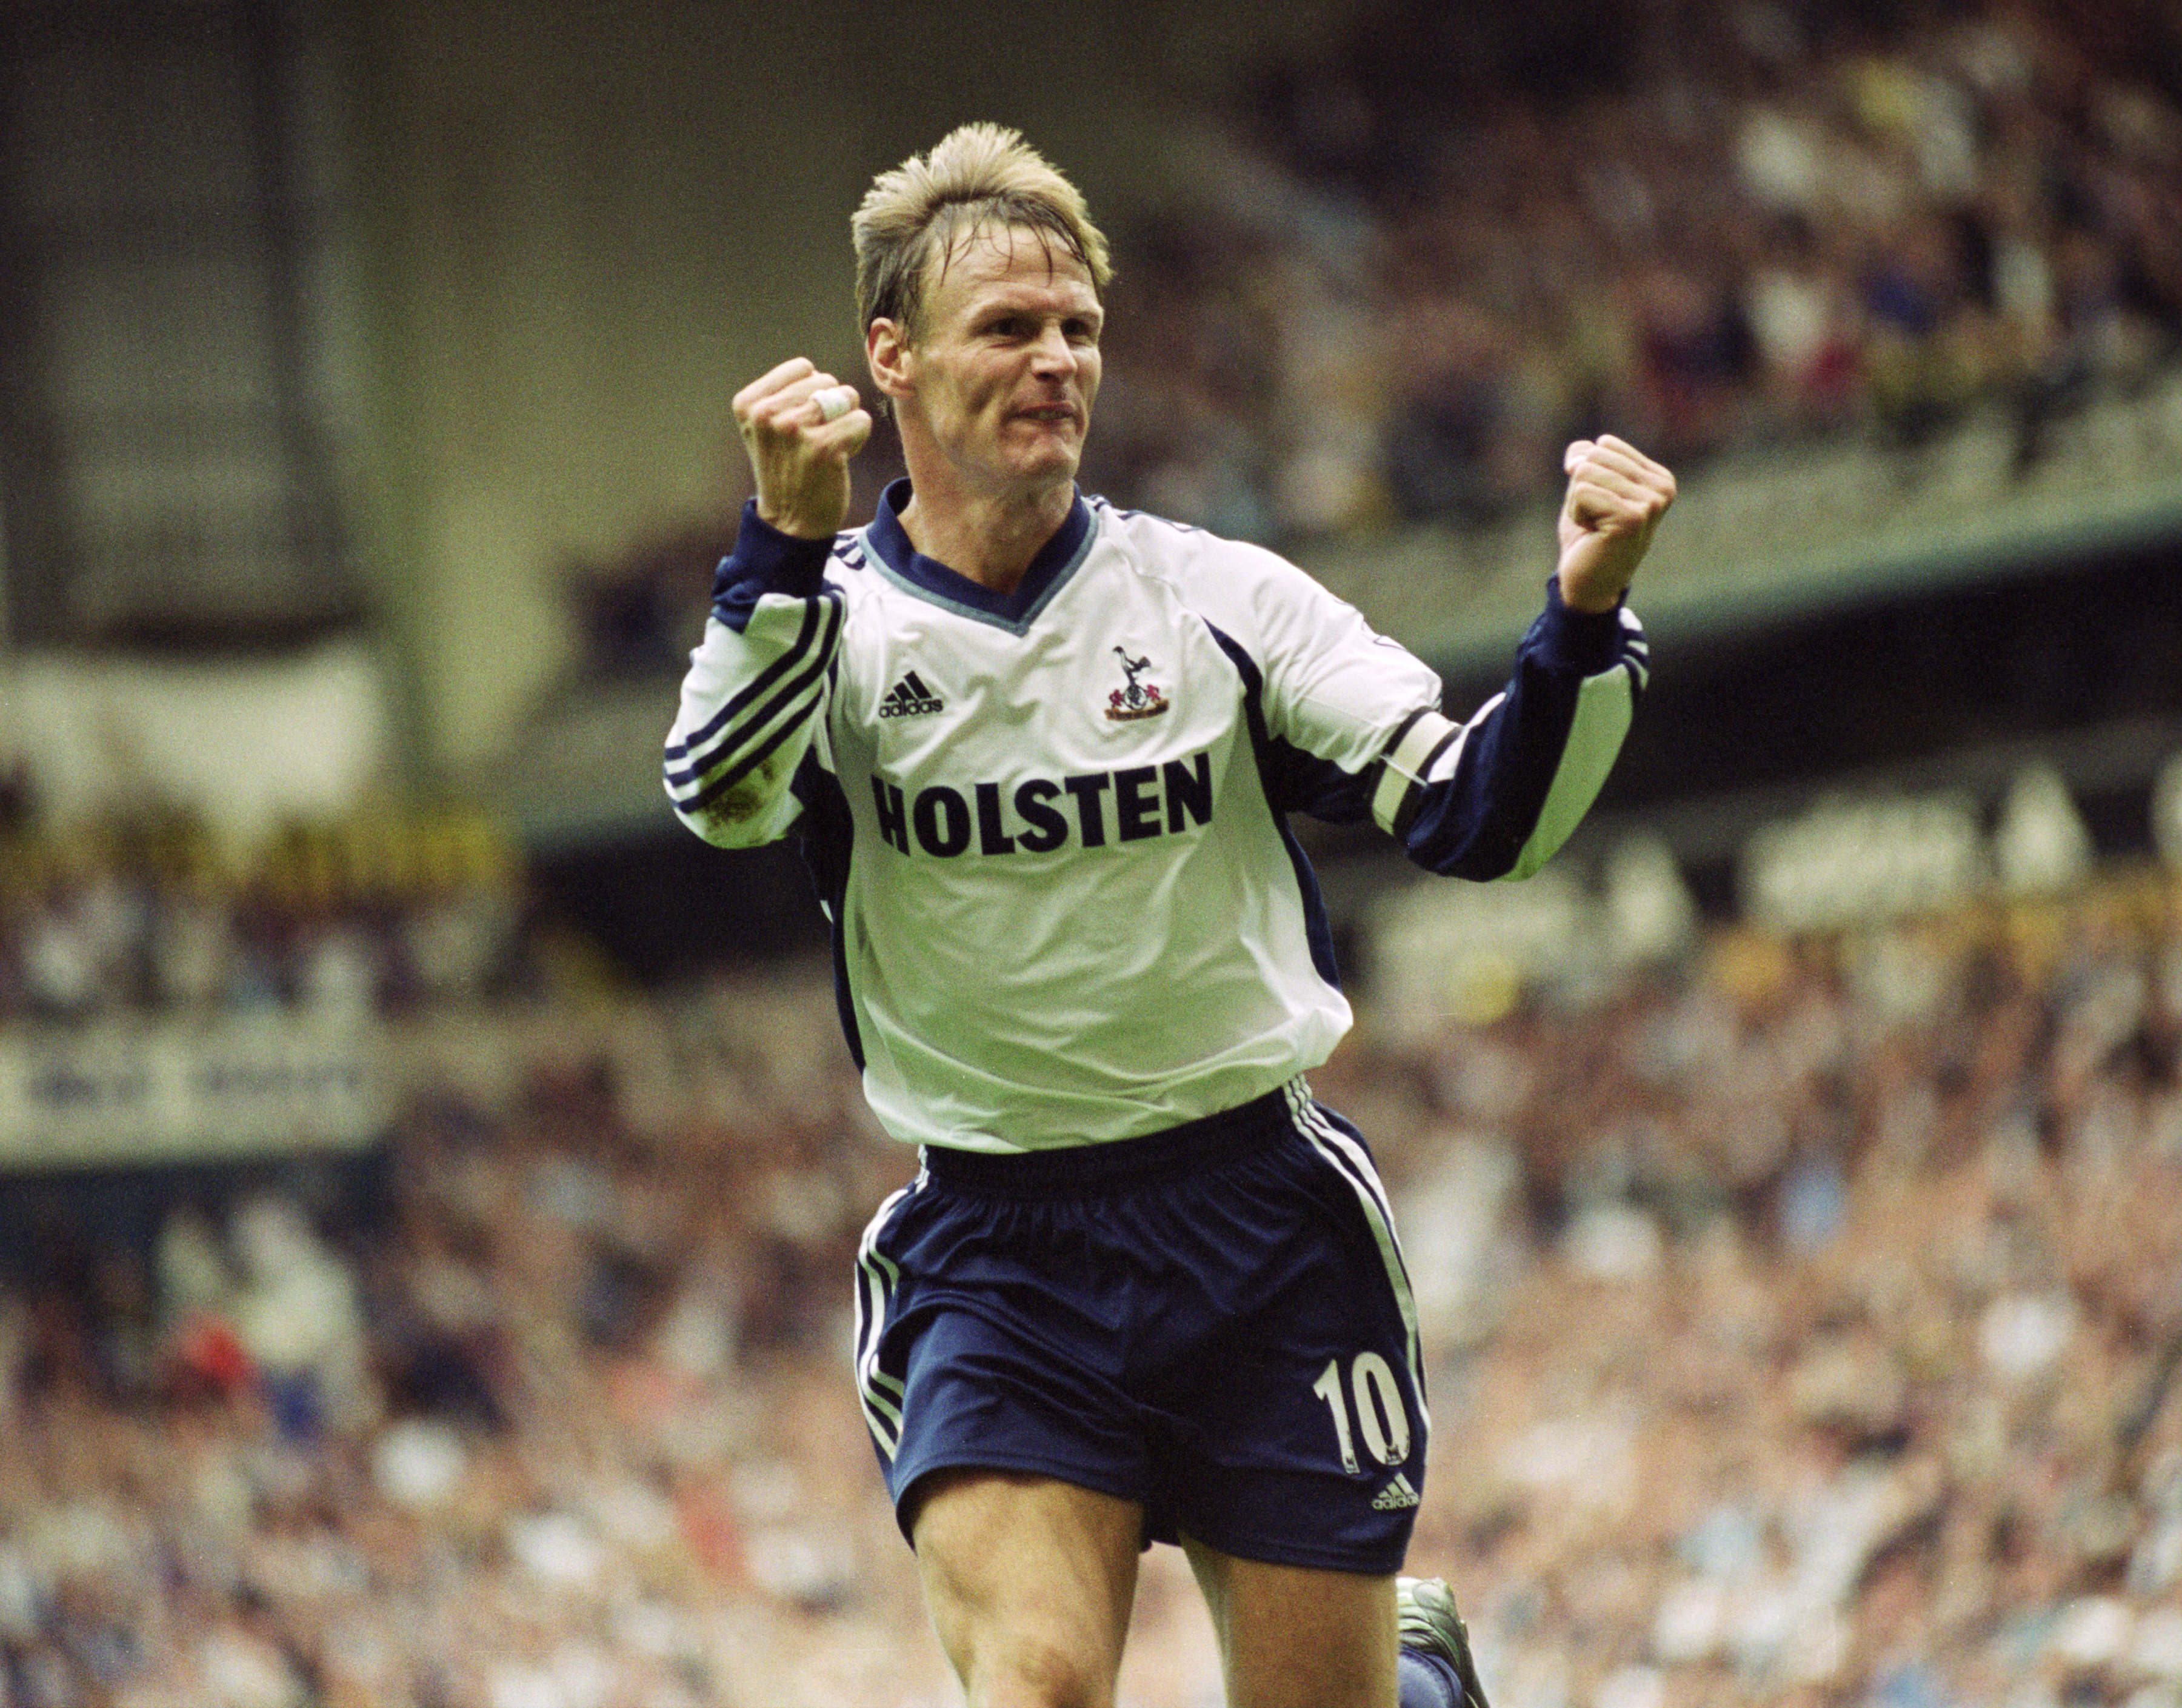 16 Sep 2001:  Teddy Sheringham celebrates scoring a goal during the FA Barclaycard Premiership match against Chelsea played at White Hart Lane in London.  Chelsea won the match 3 - 2. \ Mandatory Credit: Clive Brunskill /Allsport